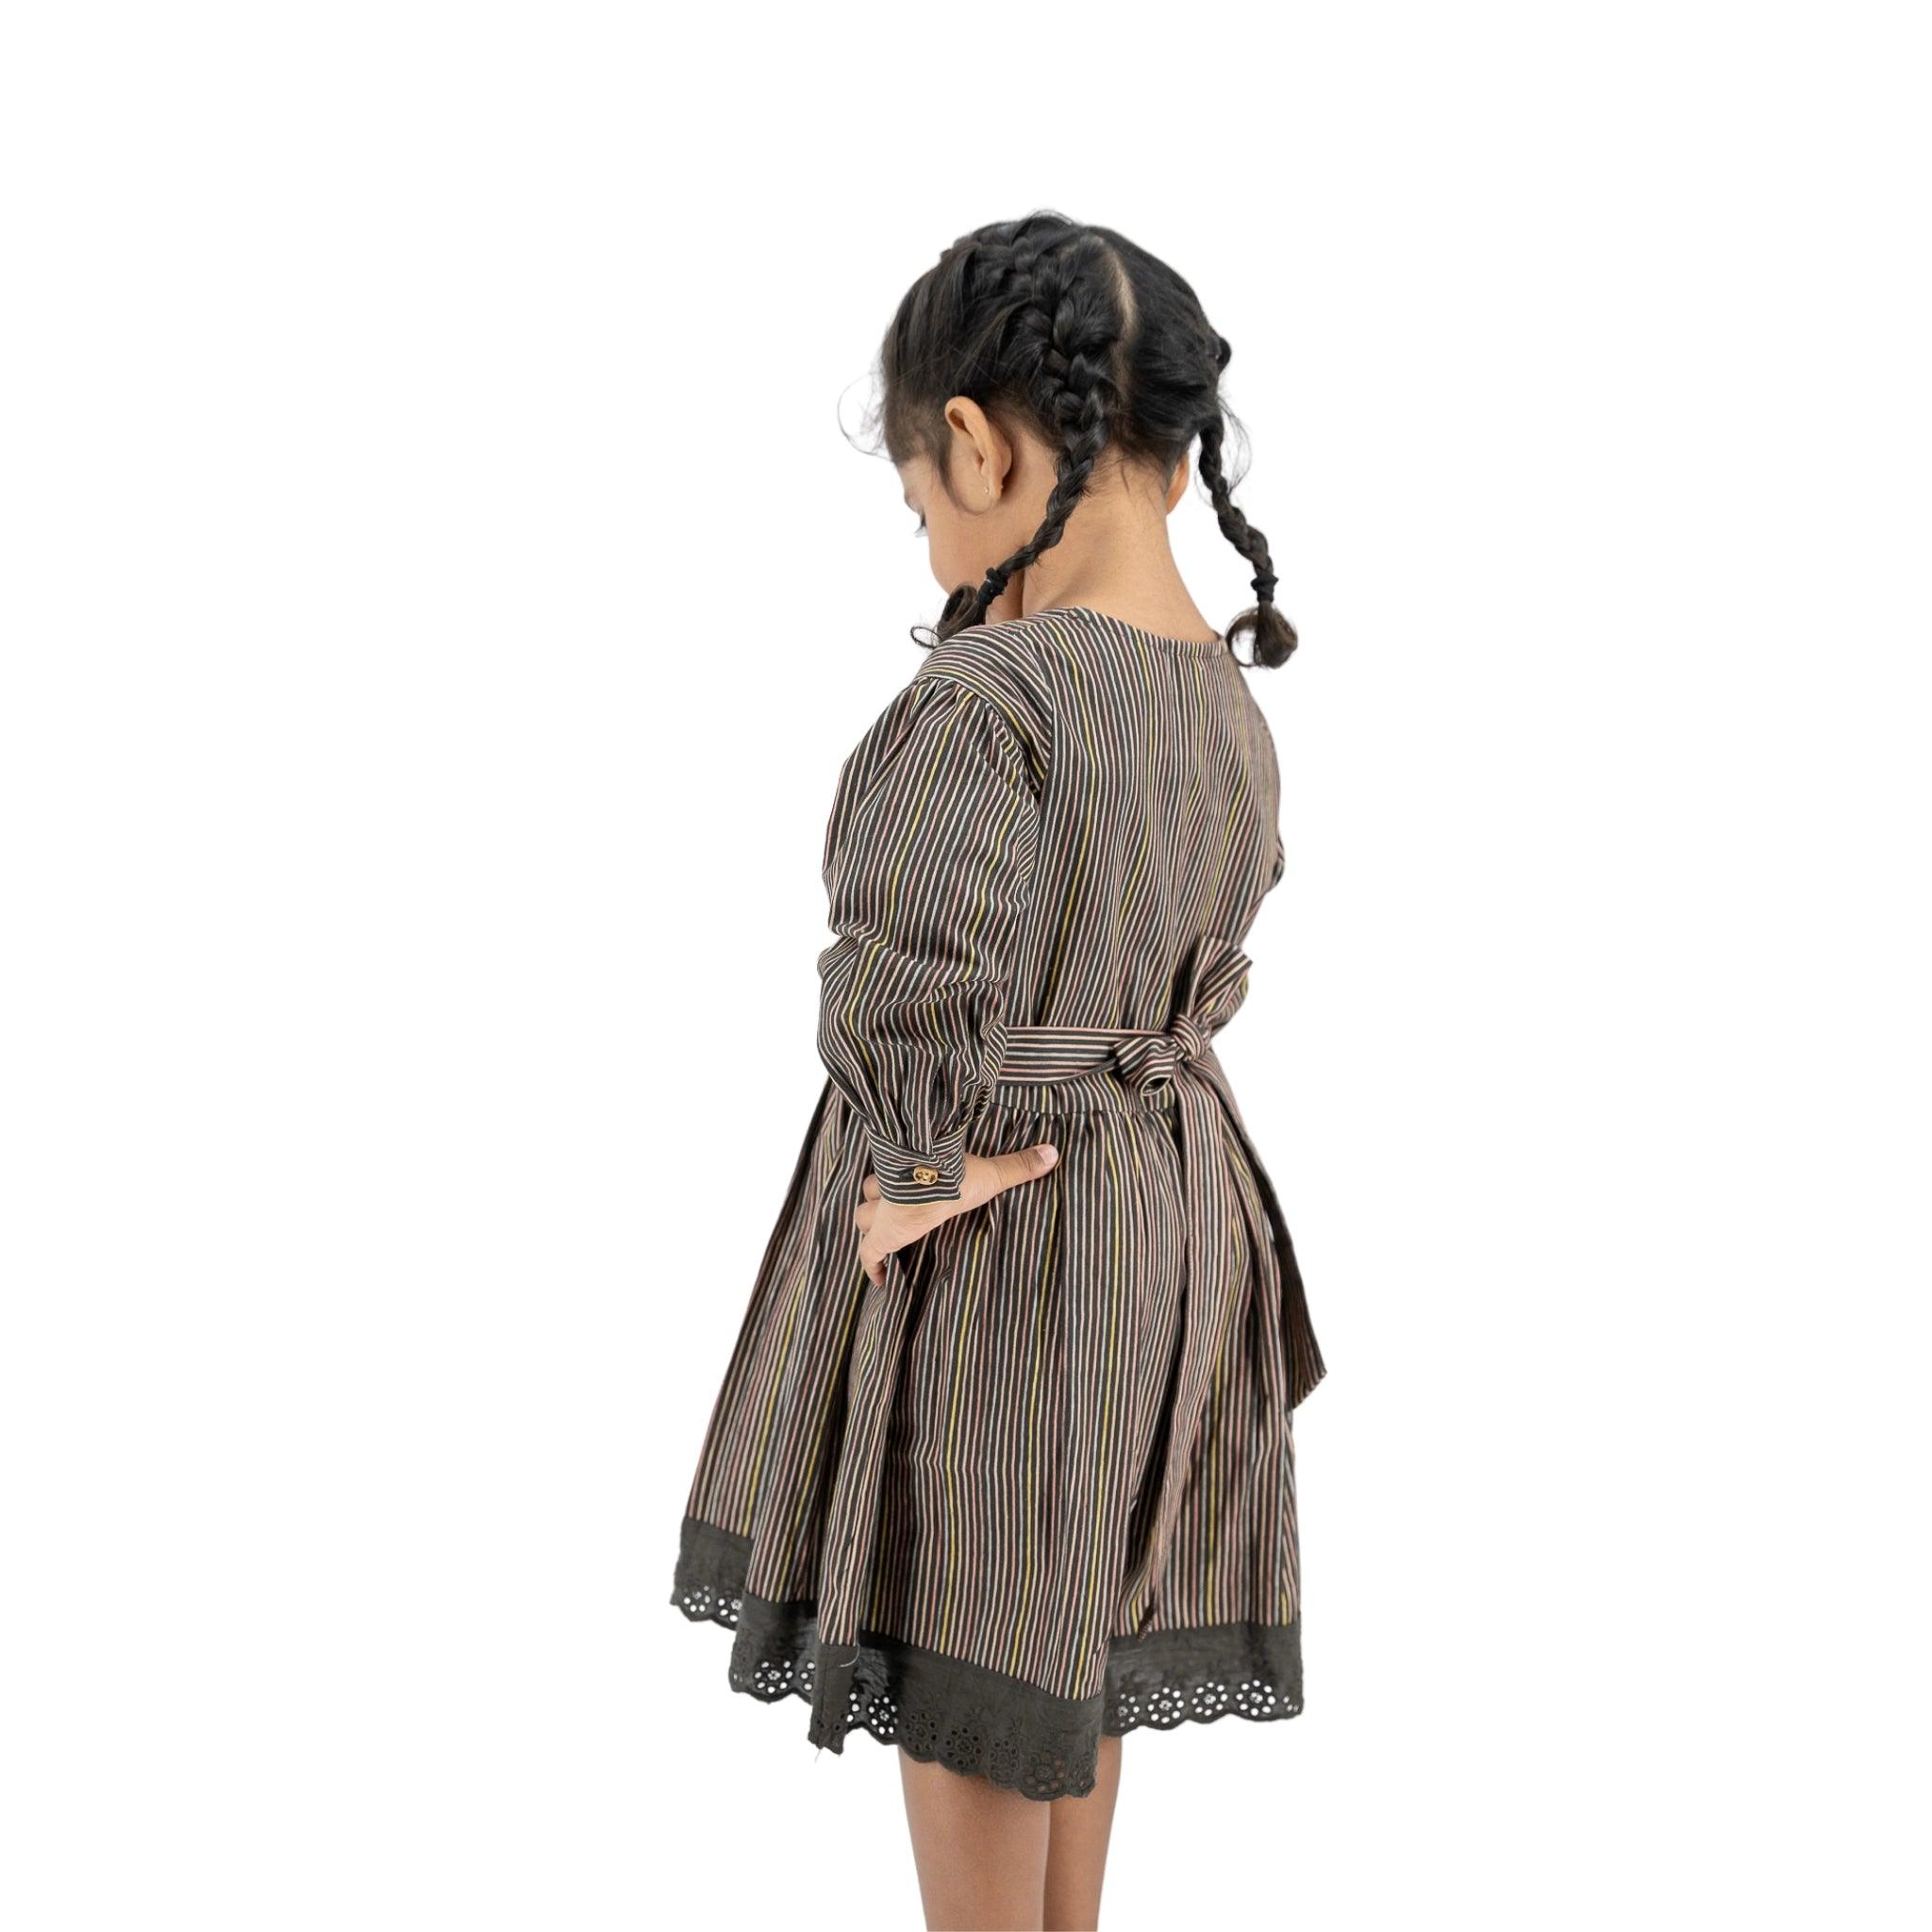 A young girl in a Karee Black Striped Full sleeve Cotton Dress with a waist tie and lace trim, seen from the back, standing against a white background.